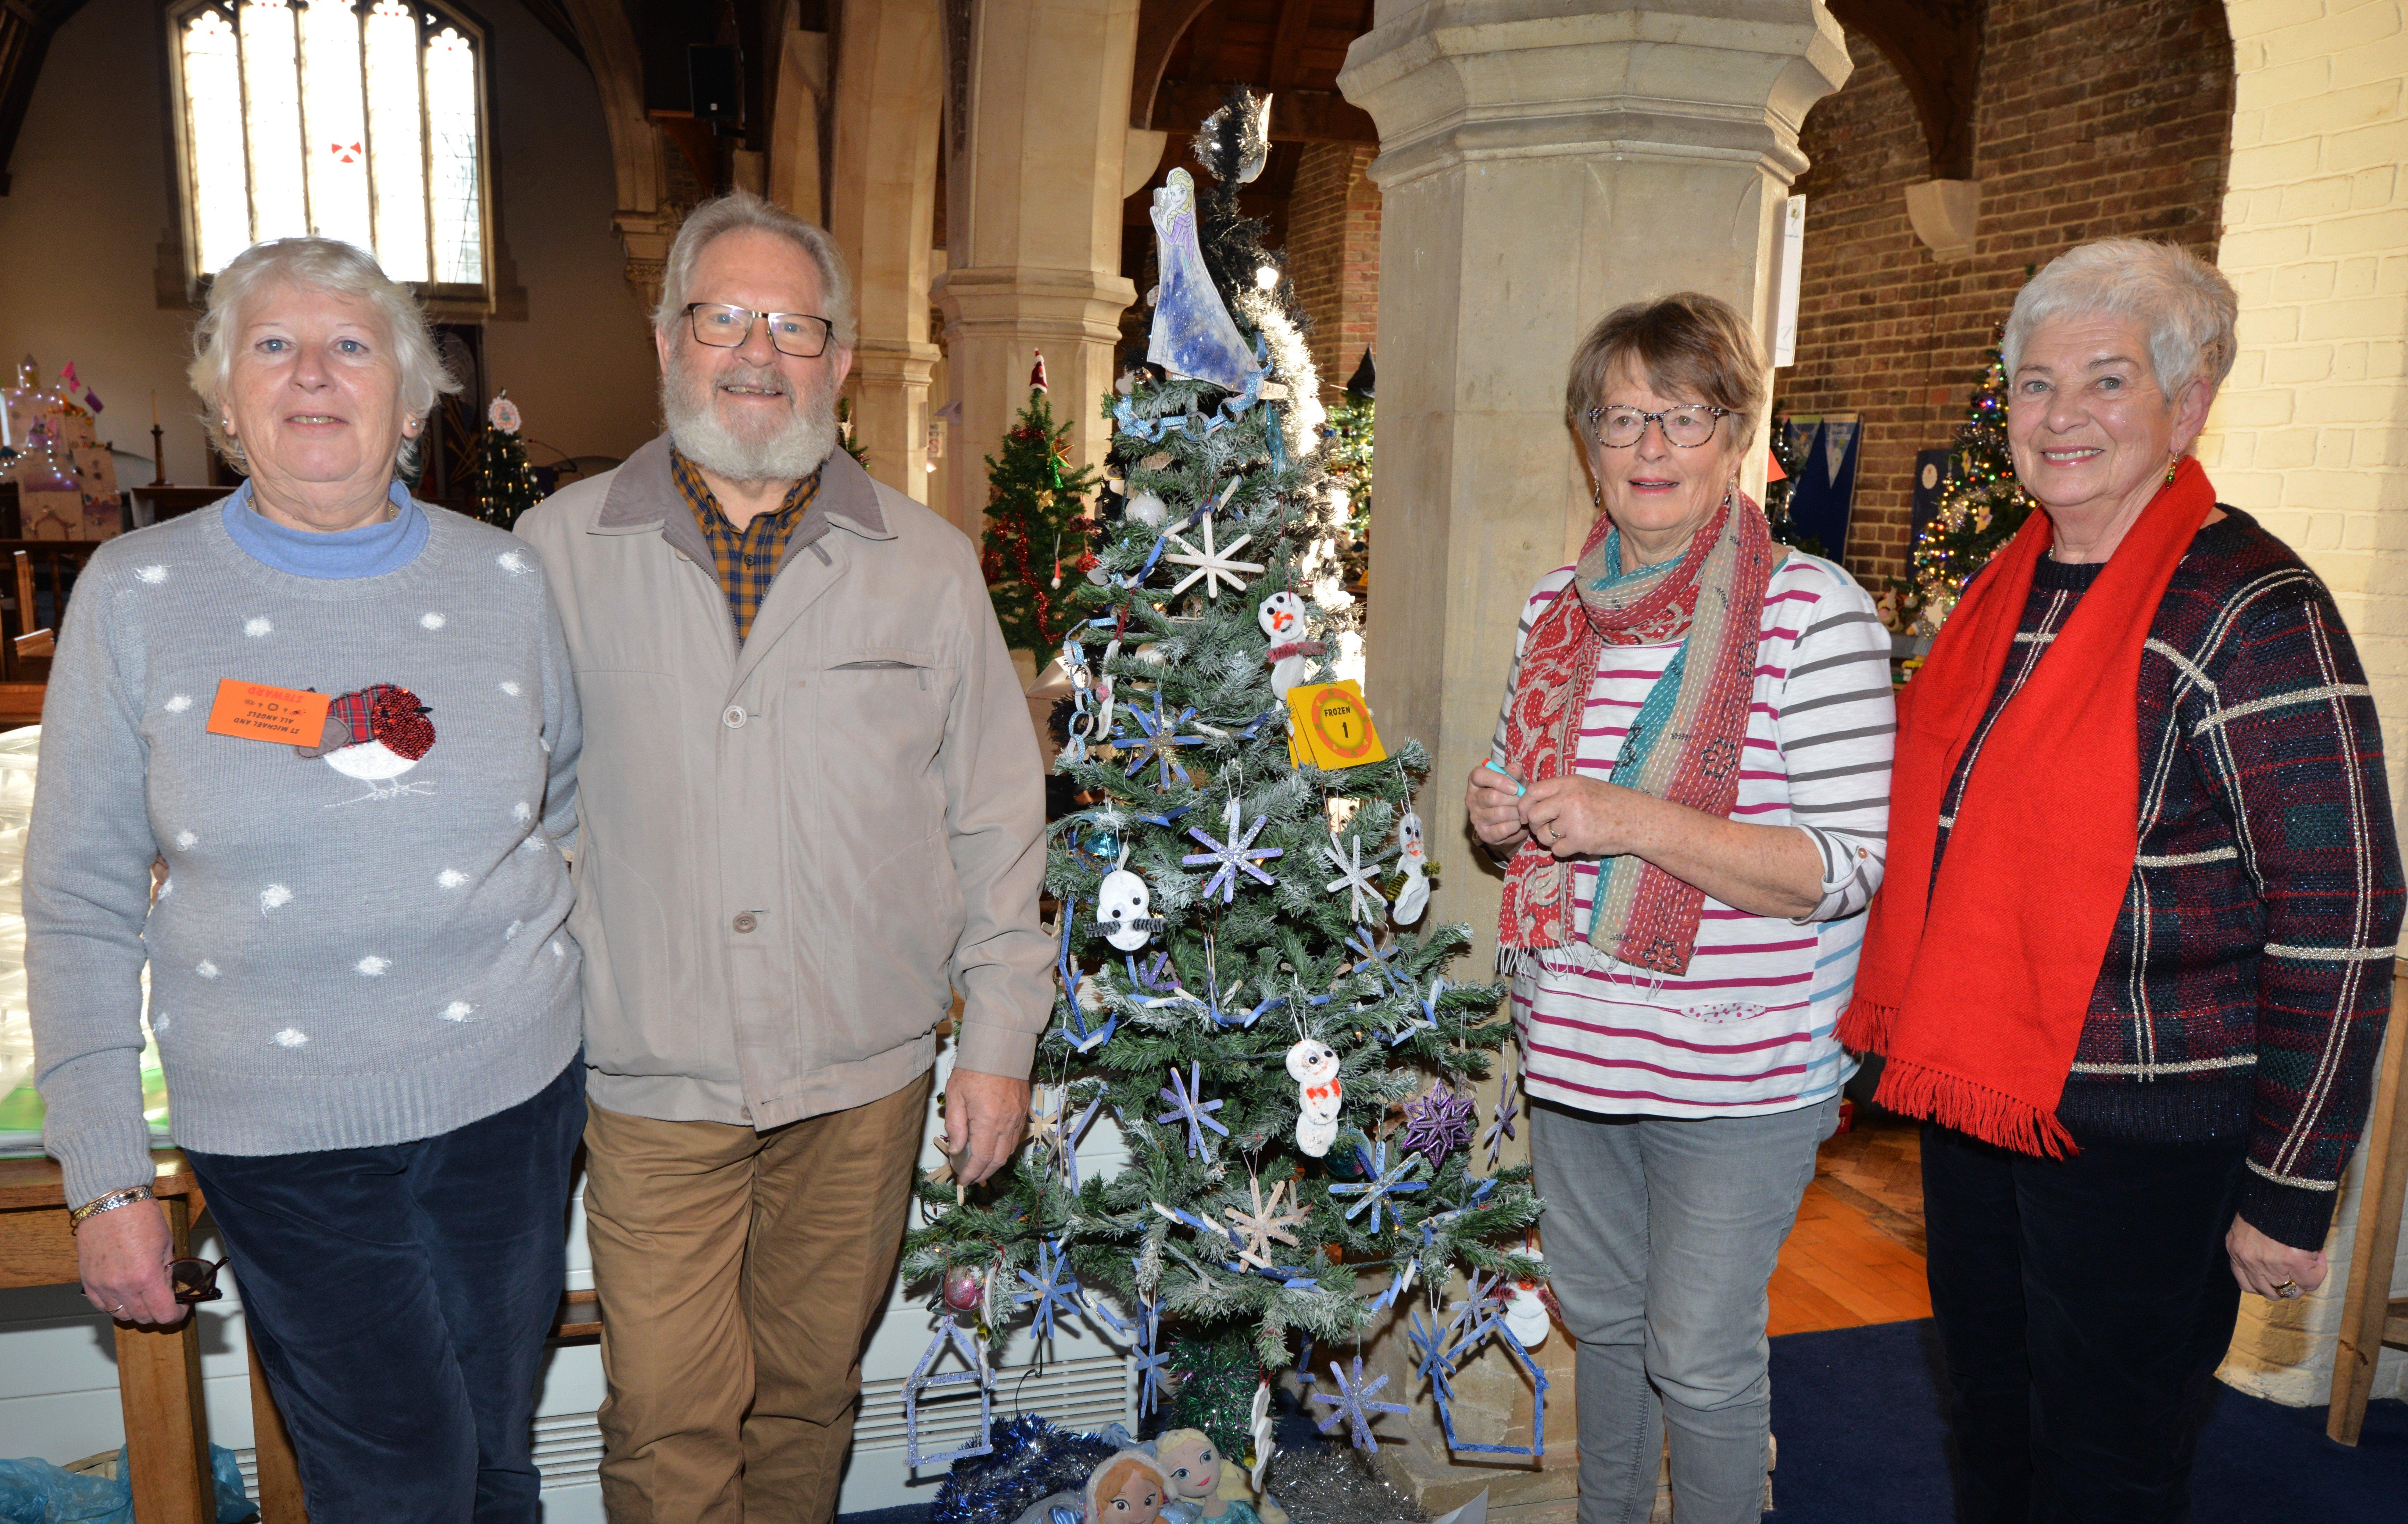 Christmas Tree Festival at St Michael & All Angels, Bexhill.

Organisers of the event: Lorraine McGuire, John Hudson, Judith Hattam and Ruth Gregory. SUS-190112-114110001